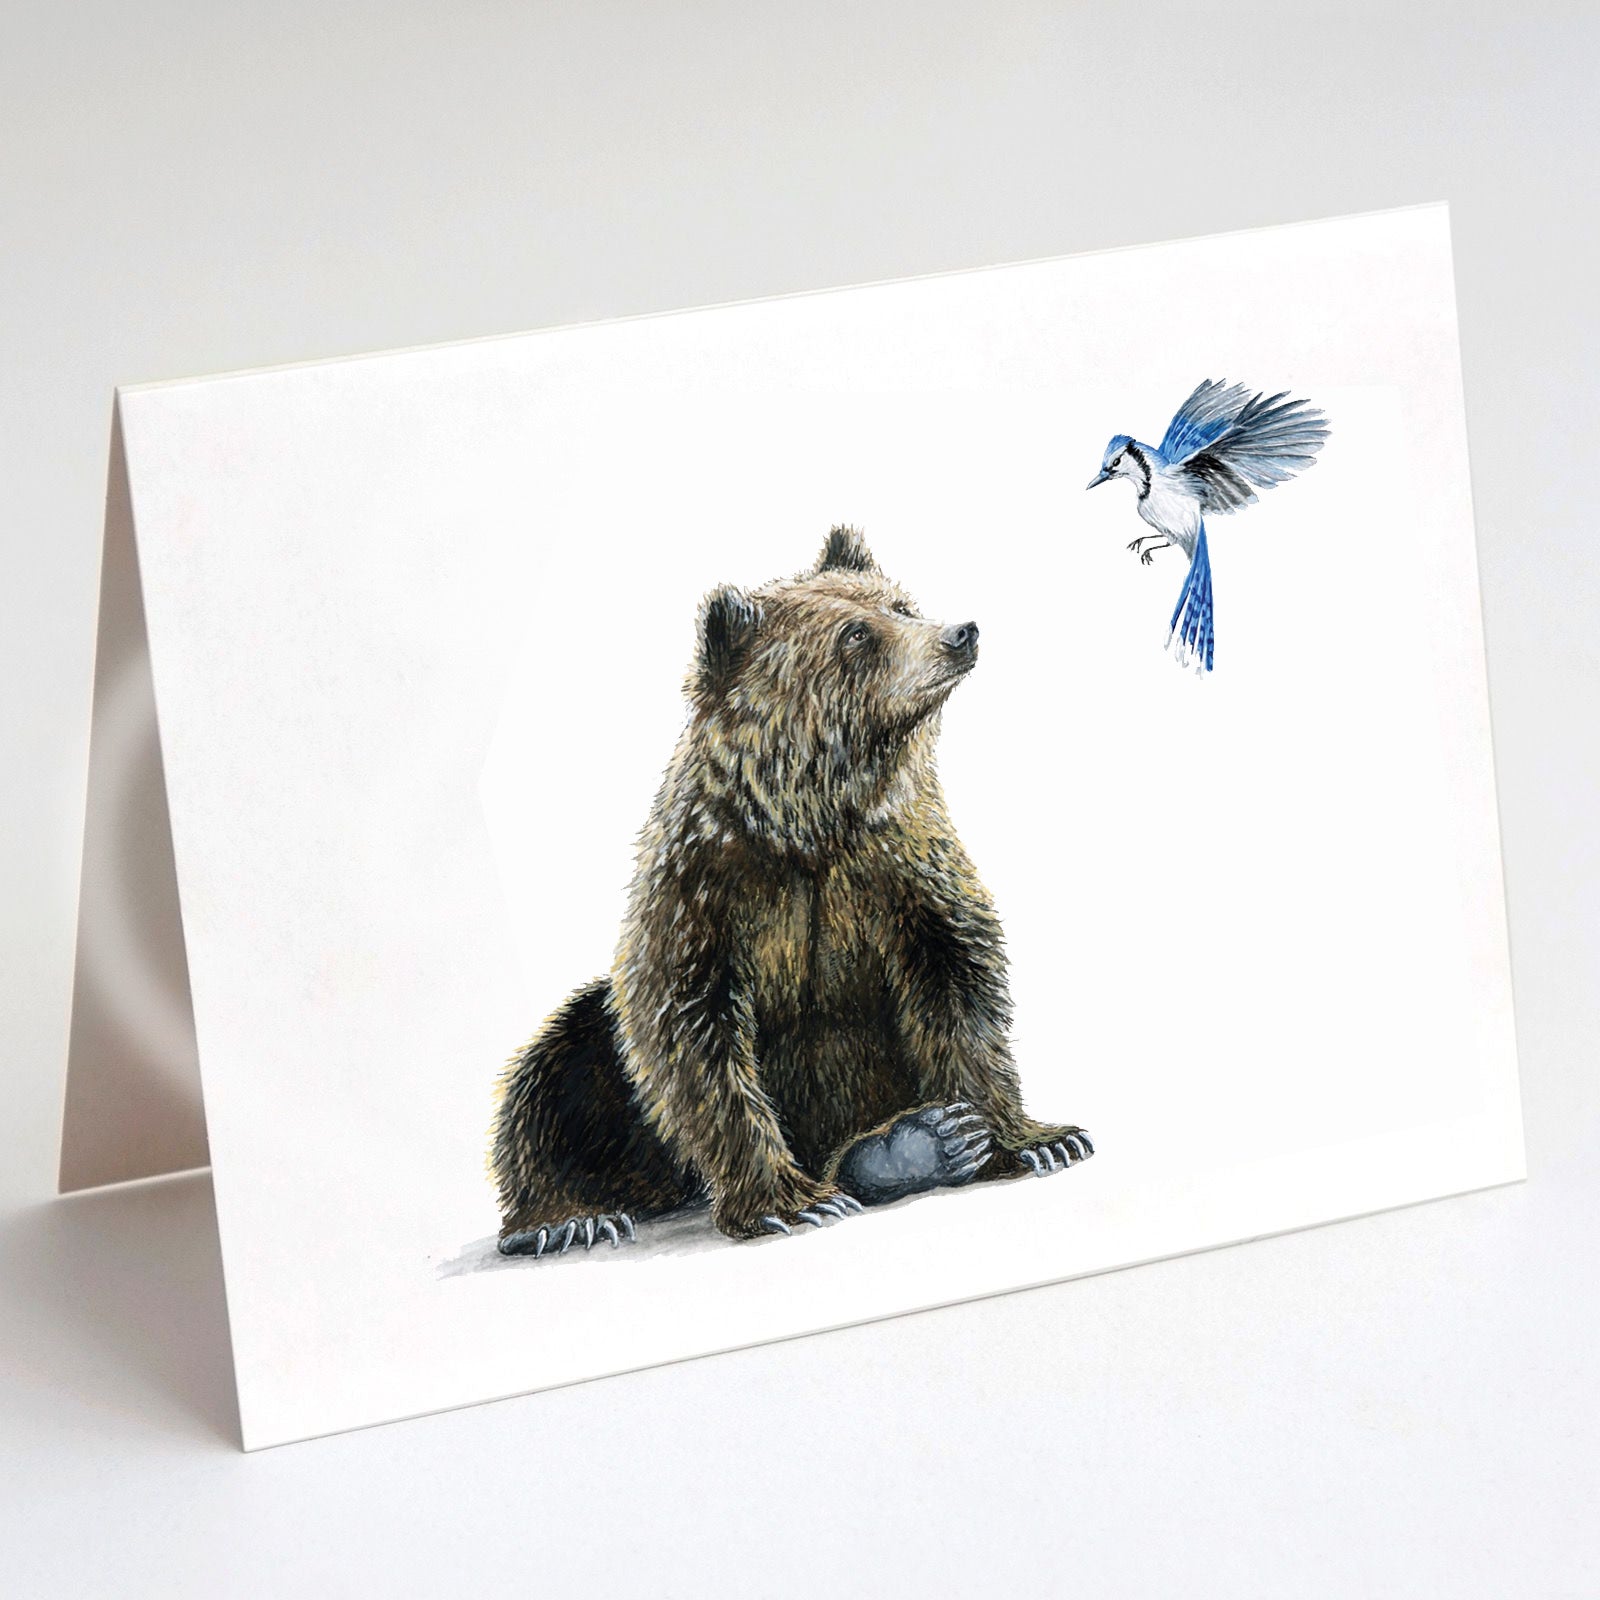 Grizzly & Blue Jay